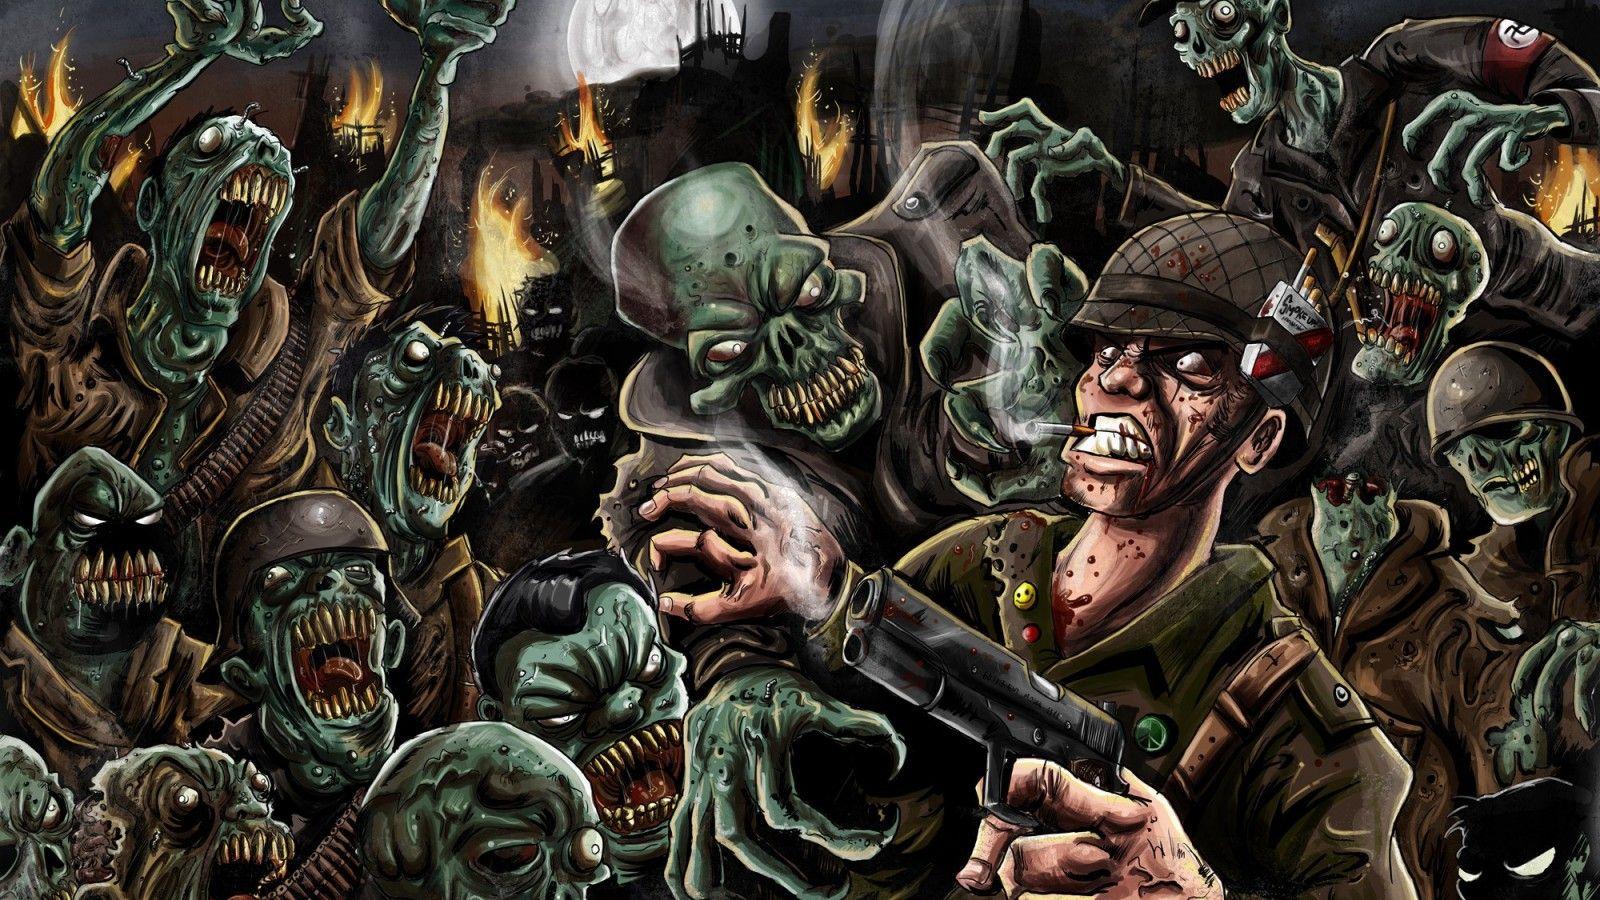 Zombies plot “Based on Real Events” in Call of Duty WW2